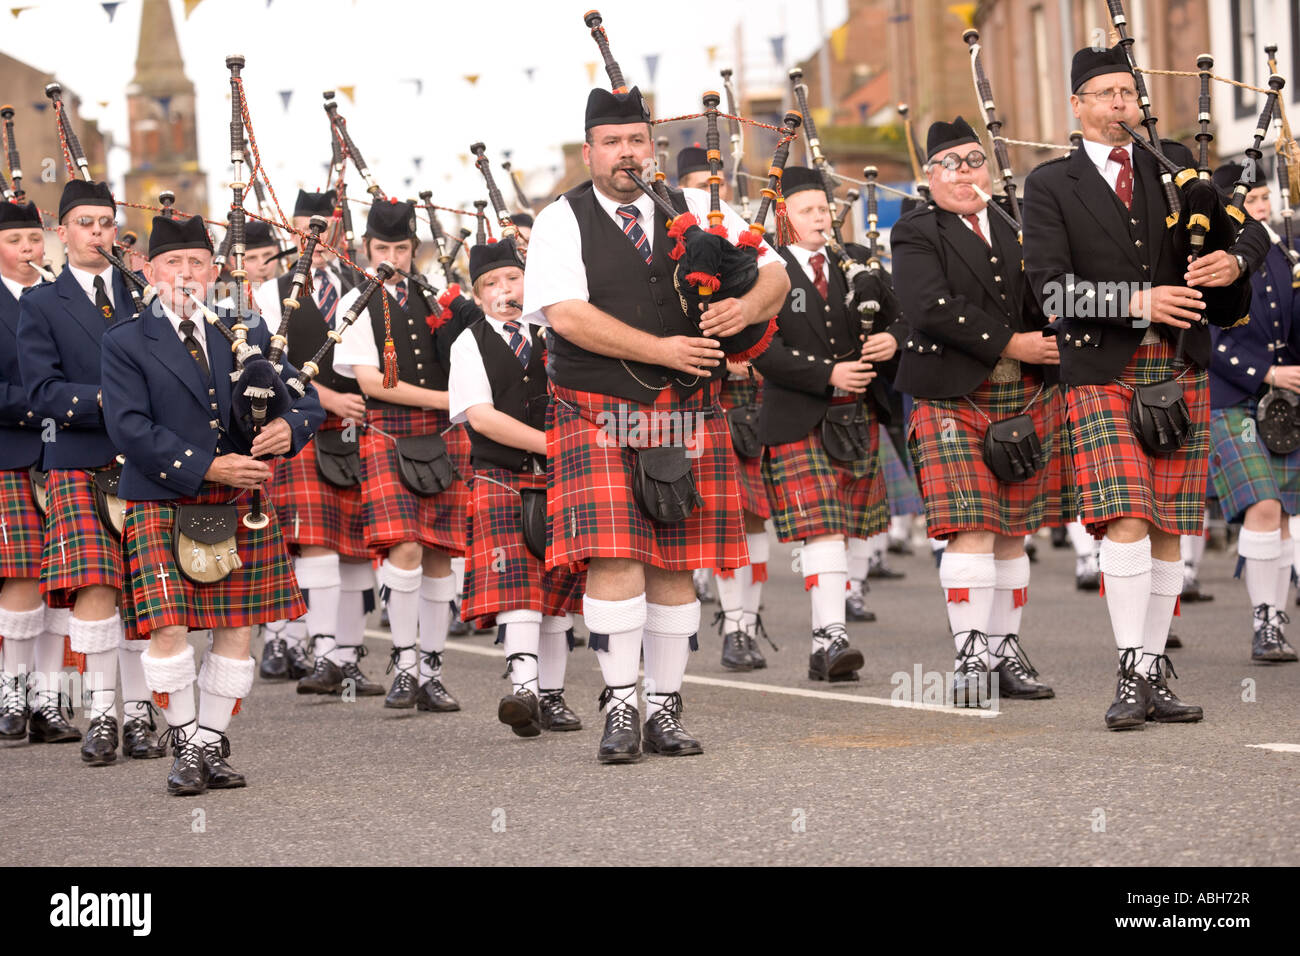 Scottish traditional music bag pipers pipe band marching down Annan High Street Scotland UK Stock Photo